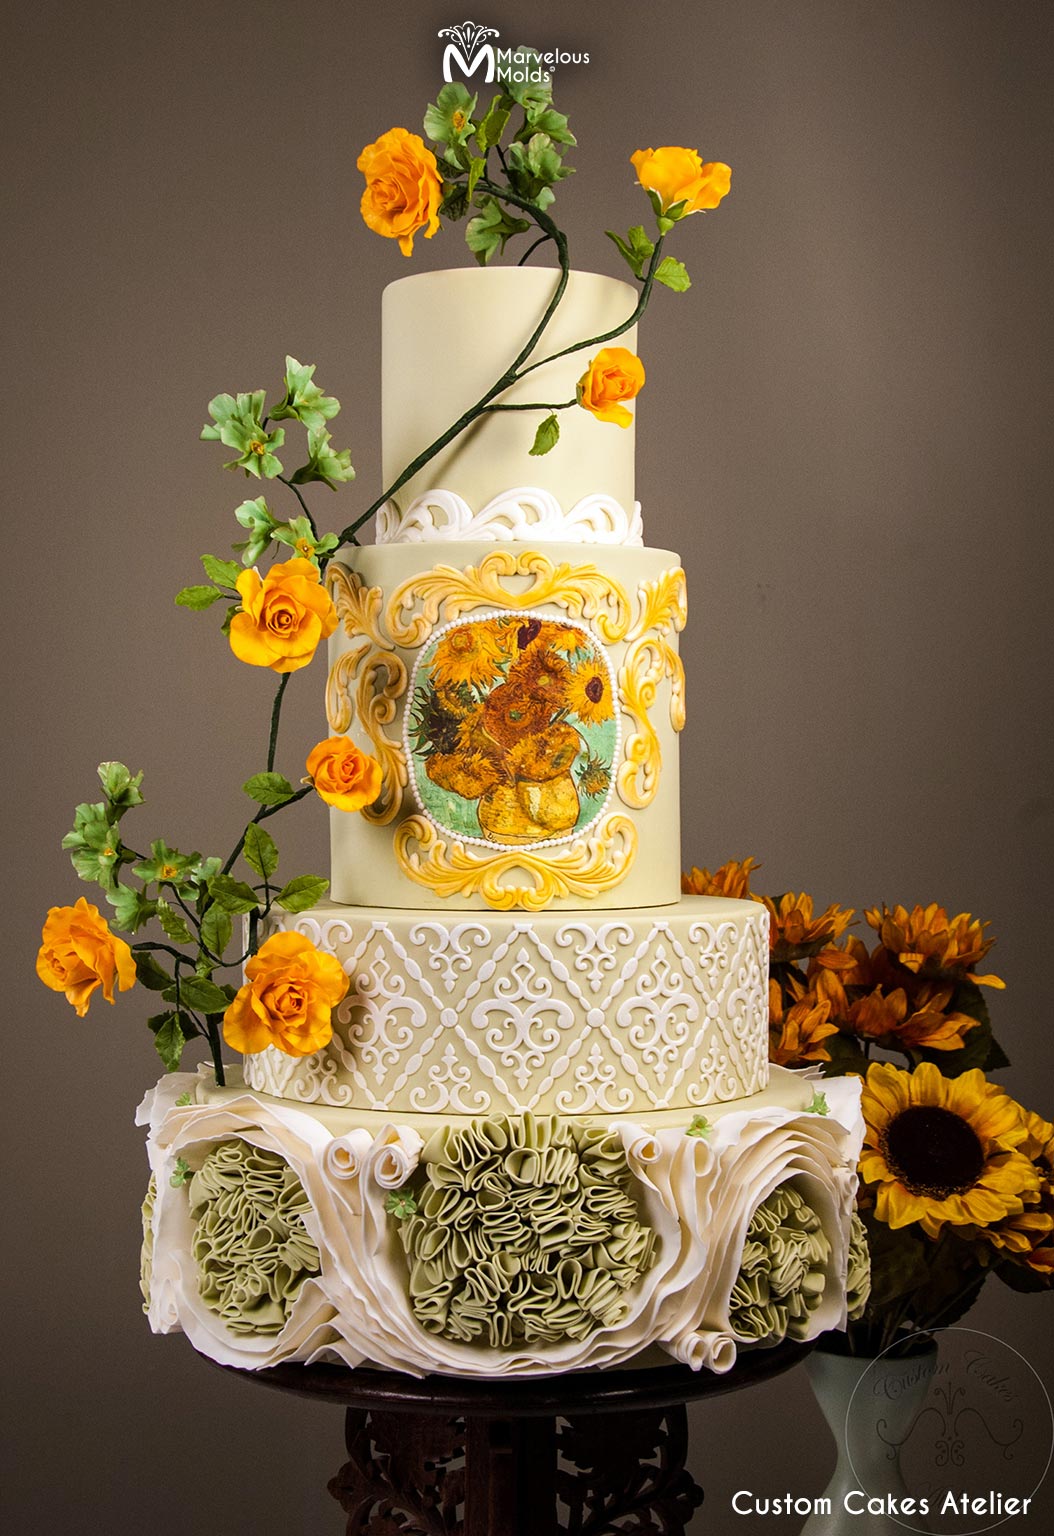 Vincent Vangough Sunflowers Themed Ruffled Wedding Cake Decorated using the Flourish Centerpiece Silicone Mold by Marvelous Molds